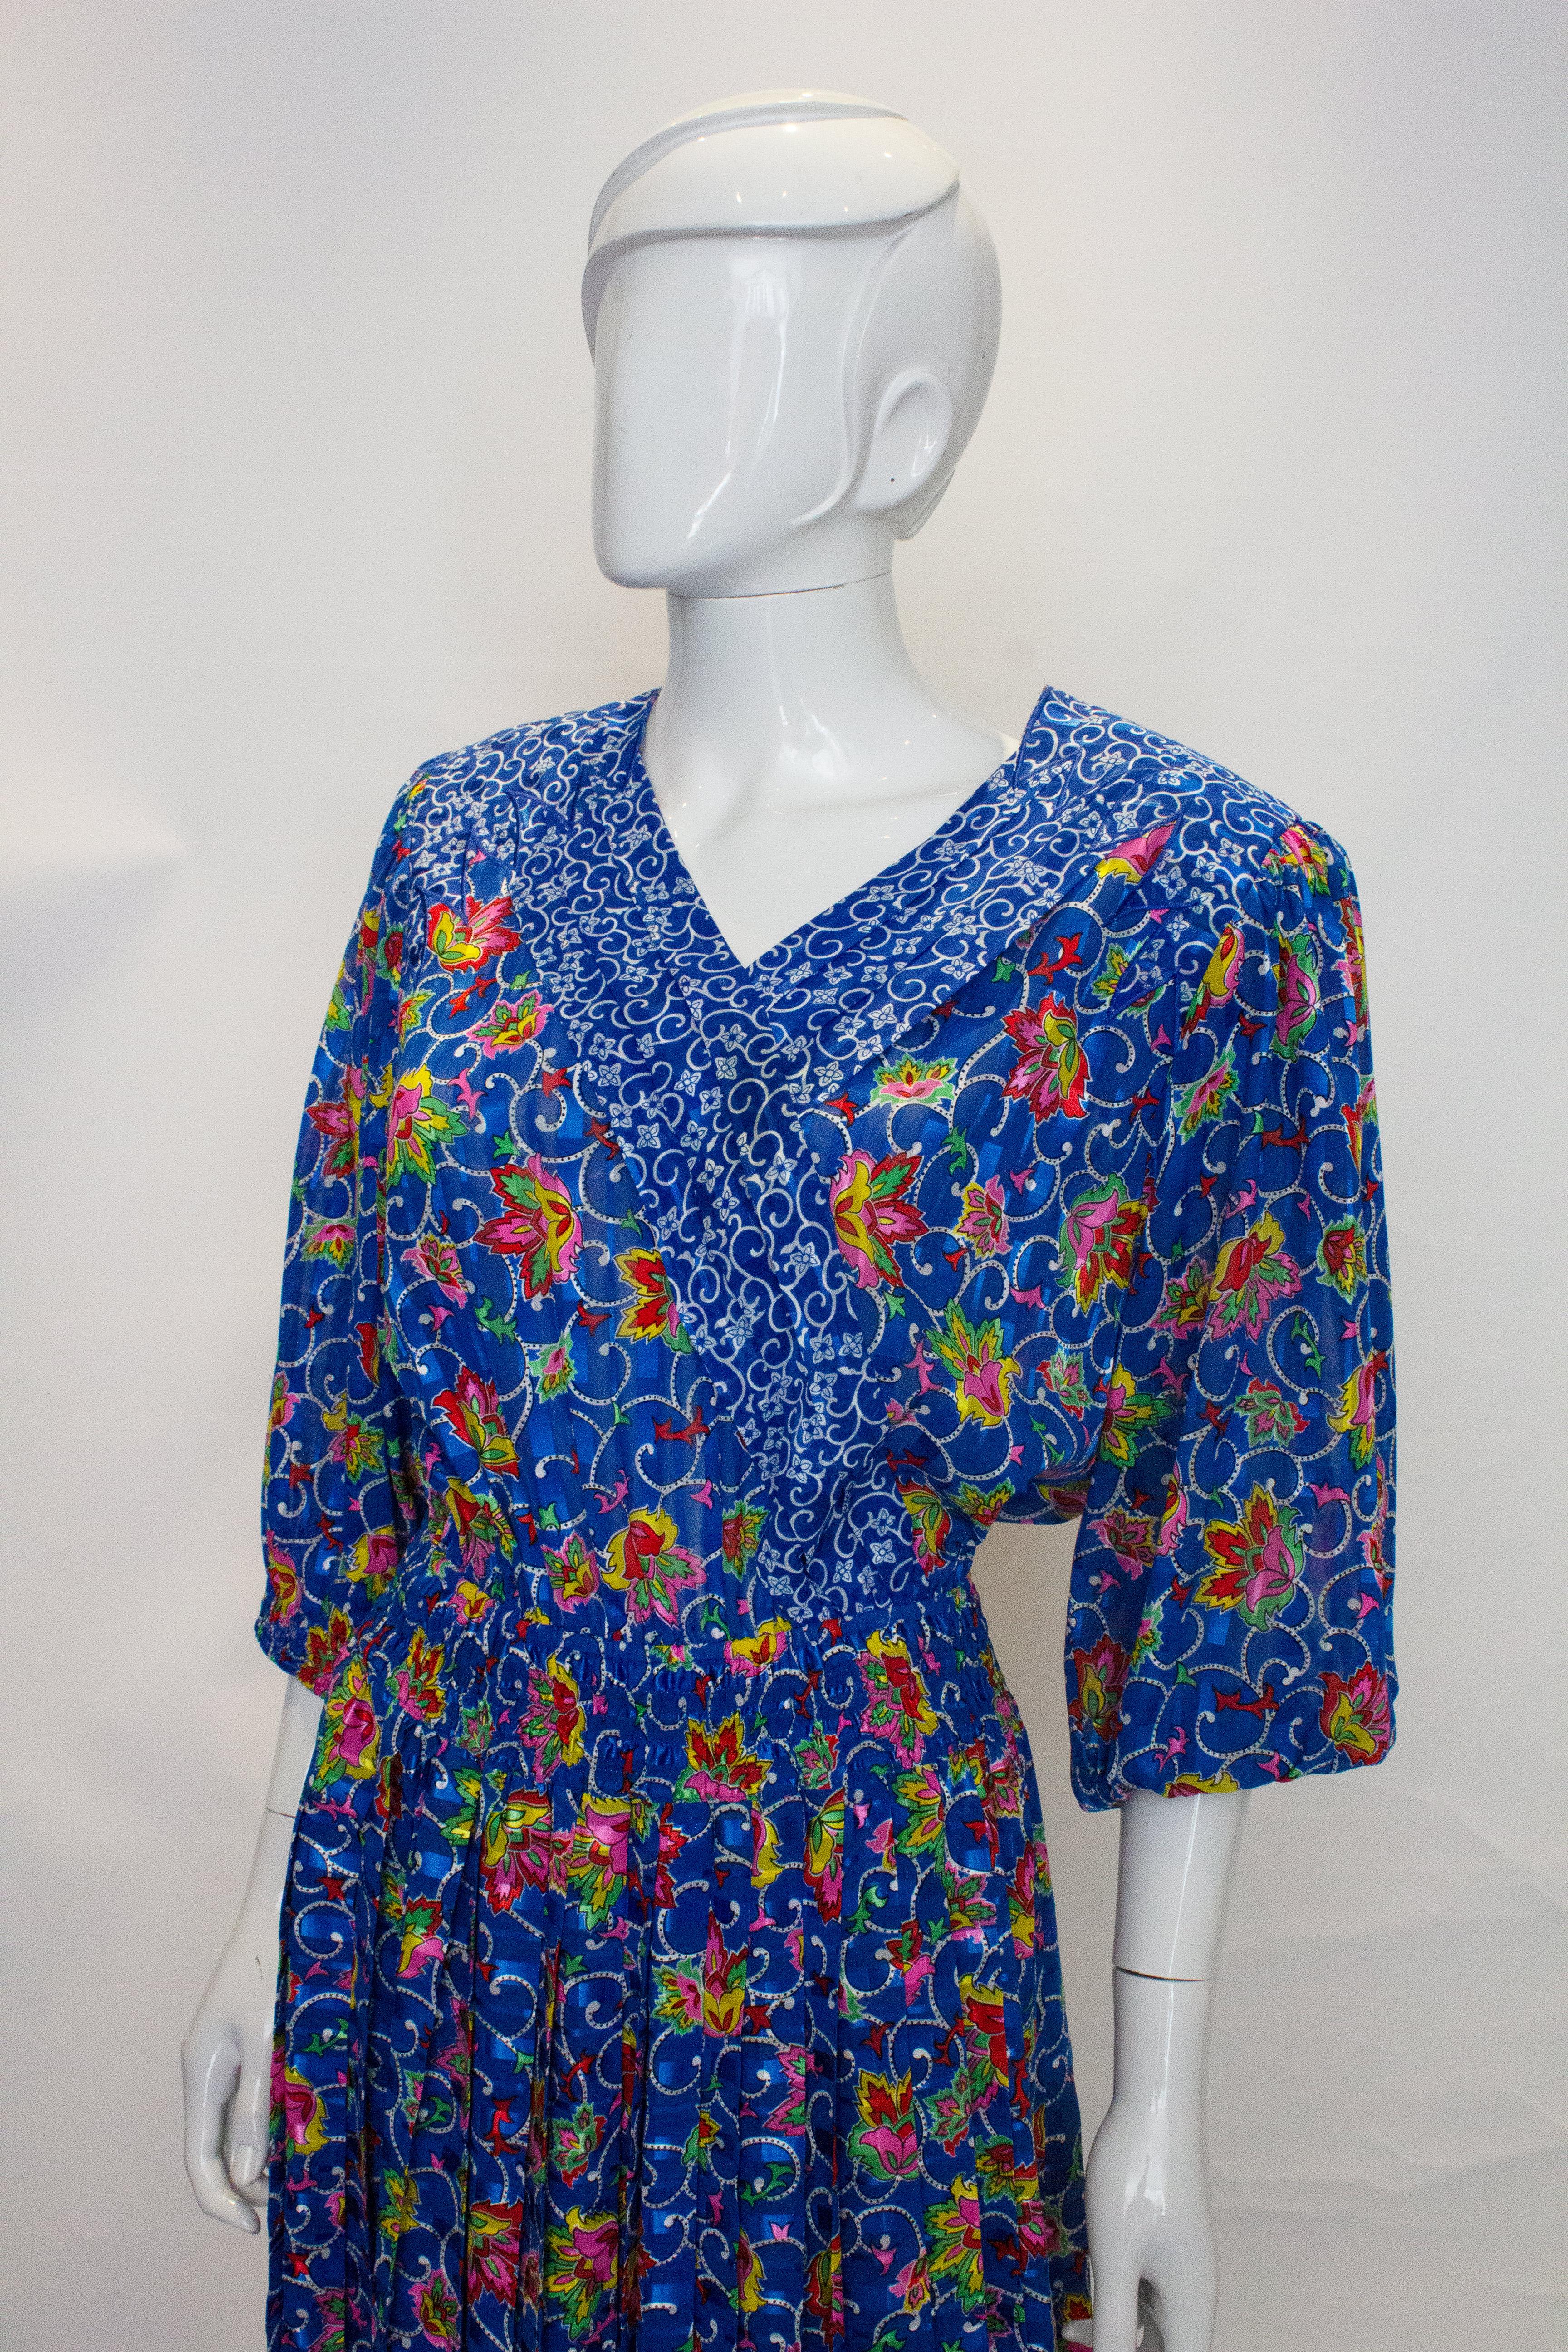 Vintage 1980s Kanga Collection Blue Floral Dress In Good Condition For Sale In London, GB